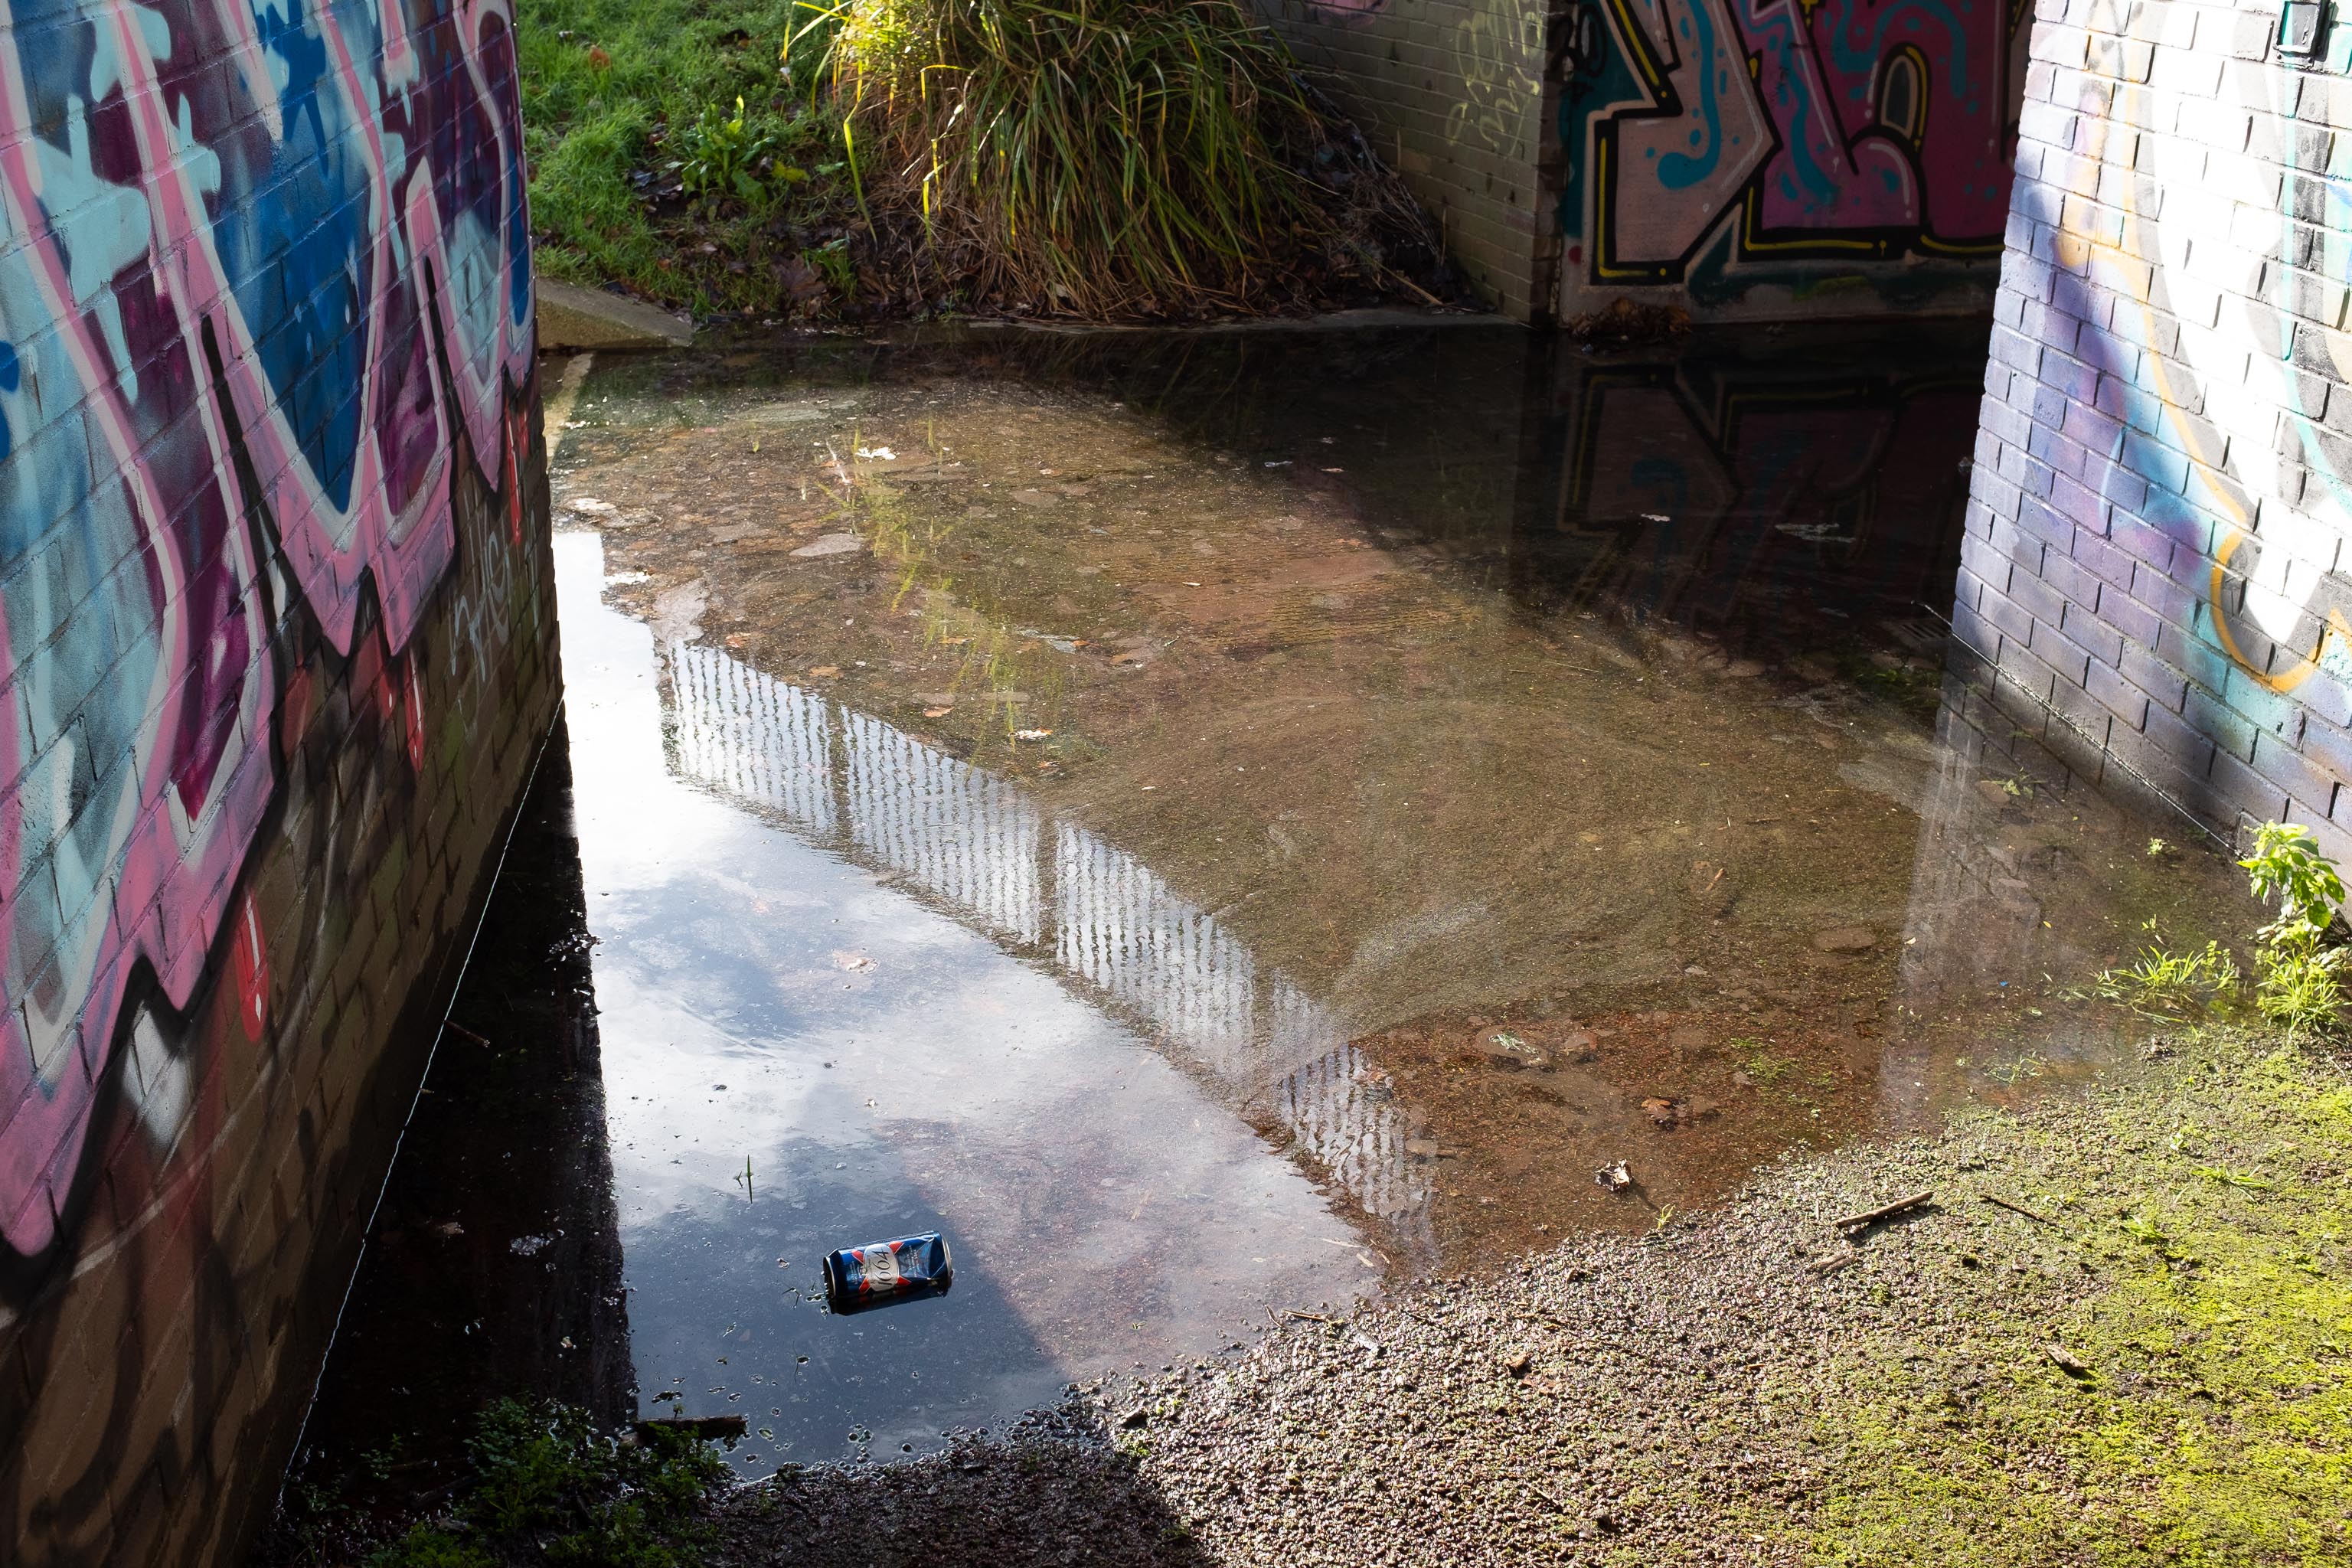 Water Feature
Just deep enough to be practically impassable, even in my waterproof Keens. I've not used this underpass to know if this is a regular occurrence or...